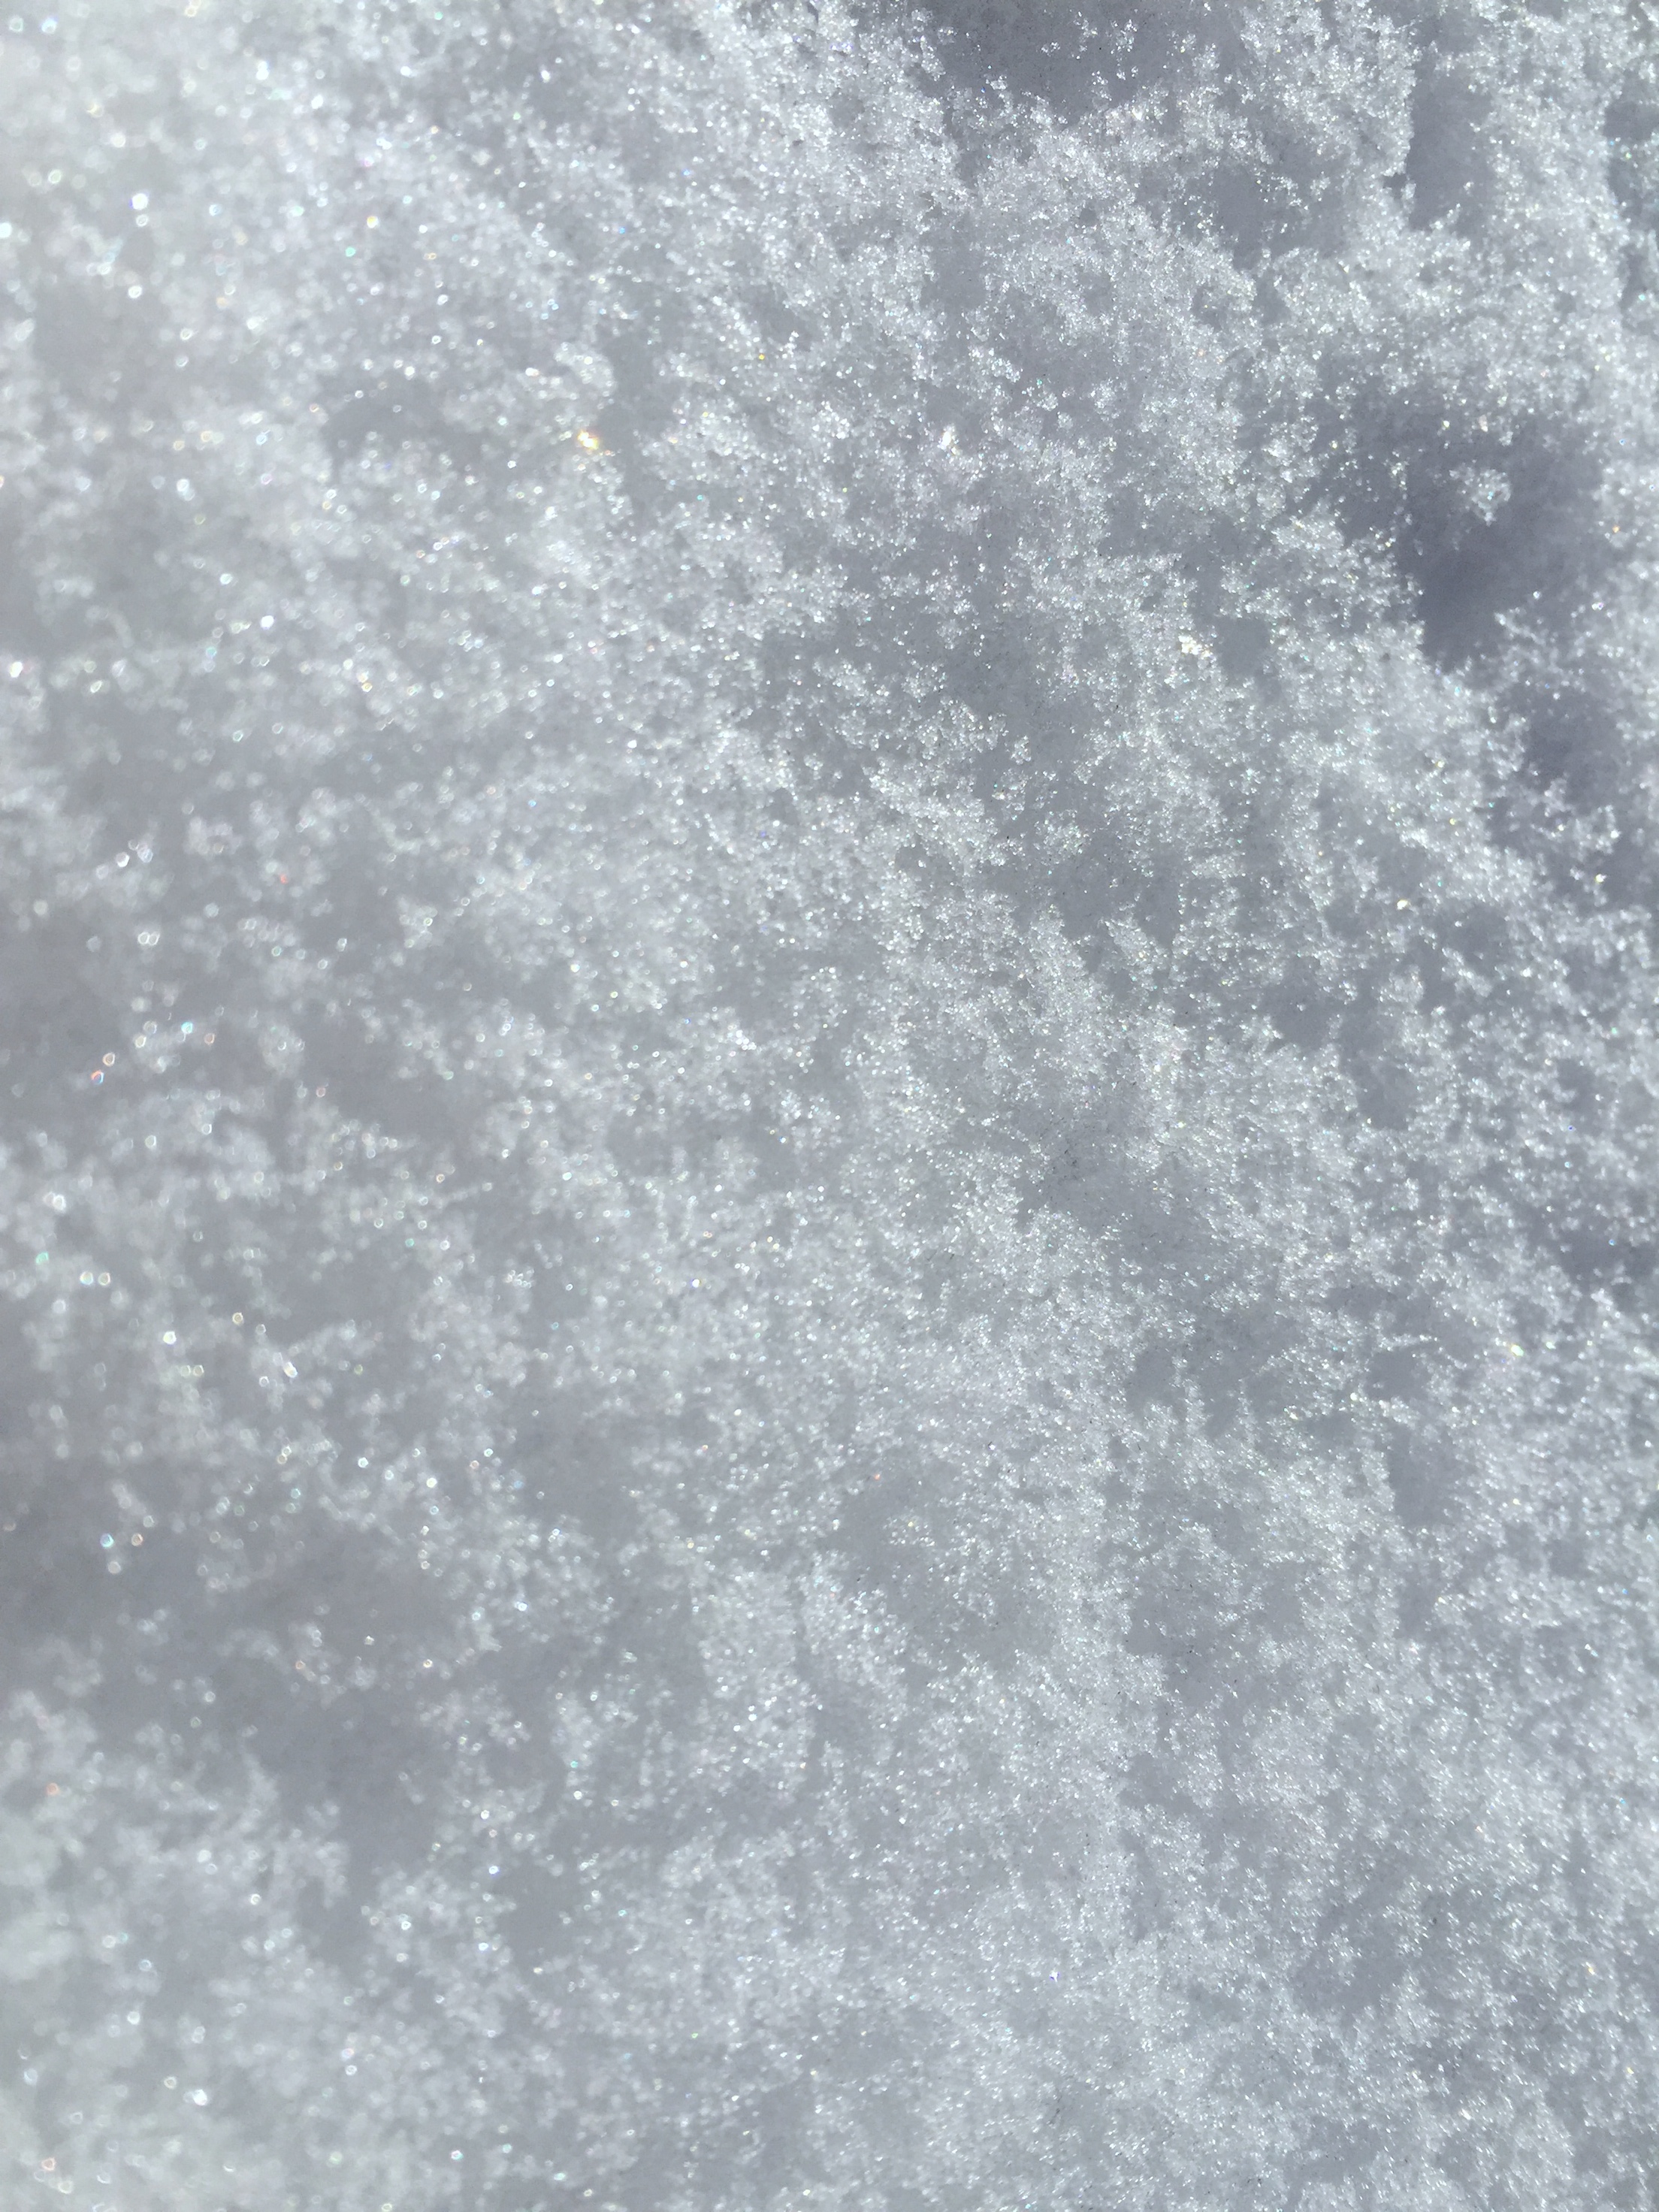  Minimalist Snow Texture Wallpapers for iPhone Plus iPad Air